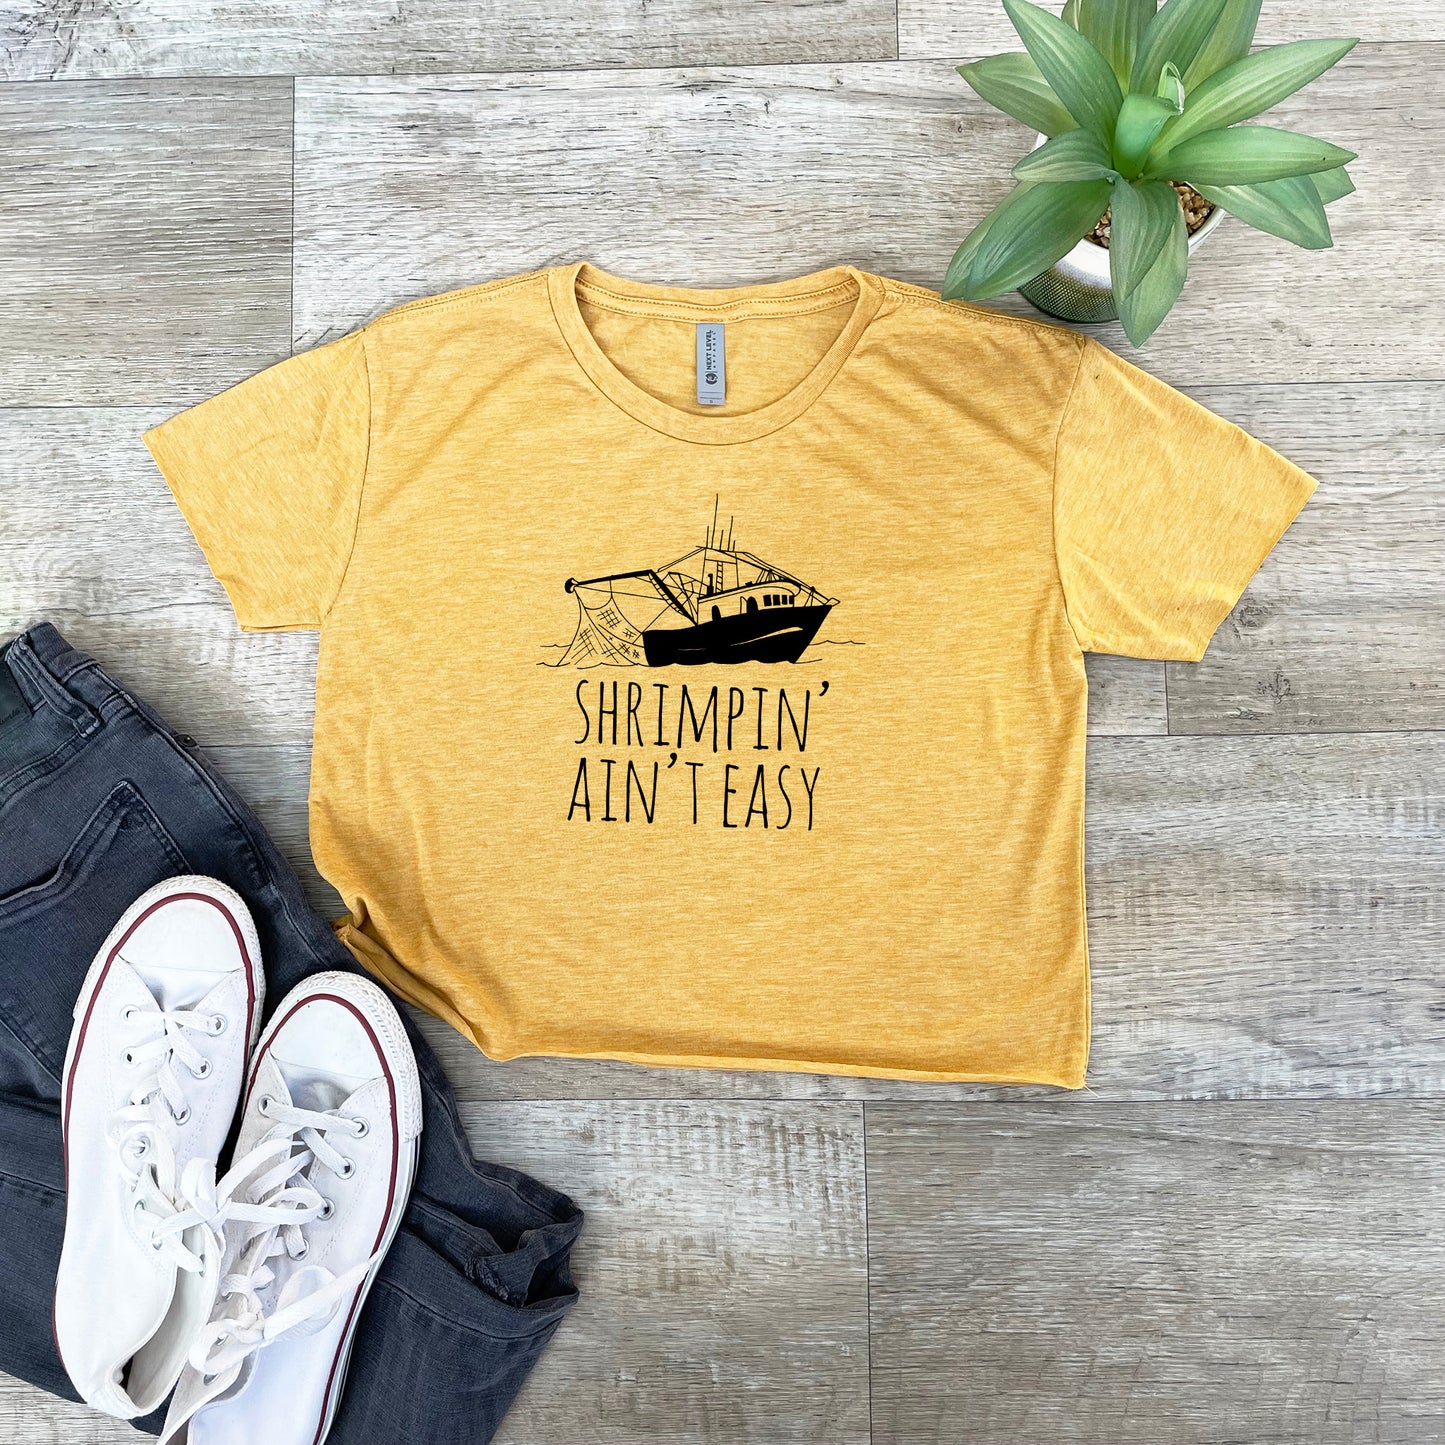 Shrimpin' Ain't Easy - Women's Crop Tee - Heather Gray or Gold